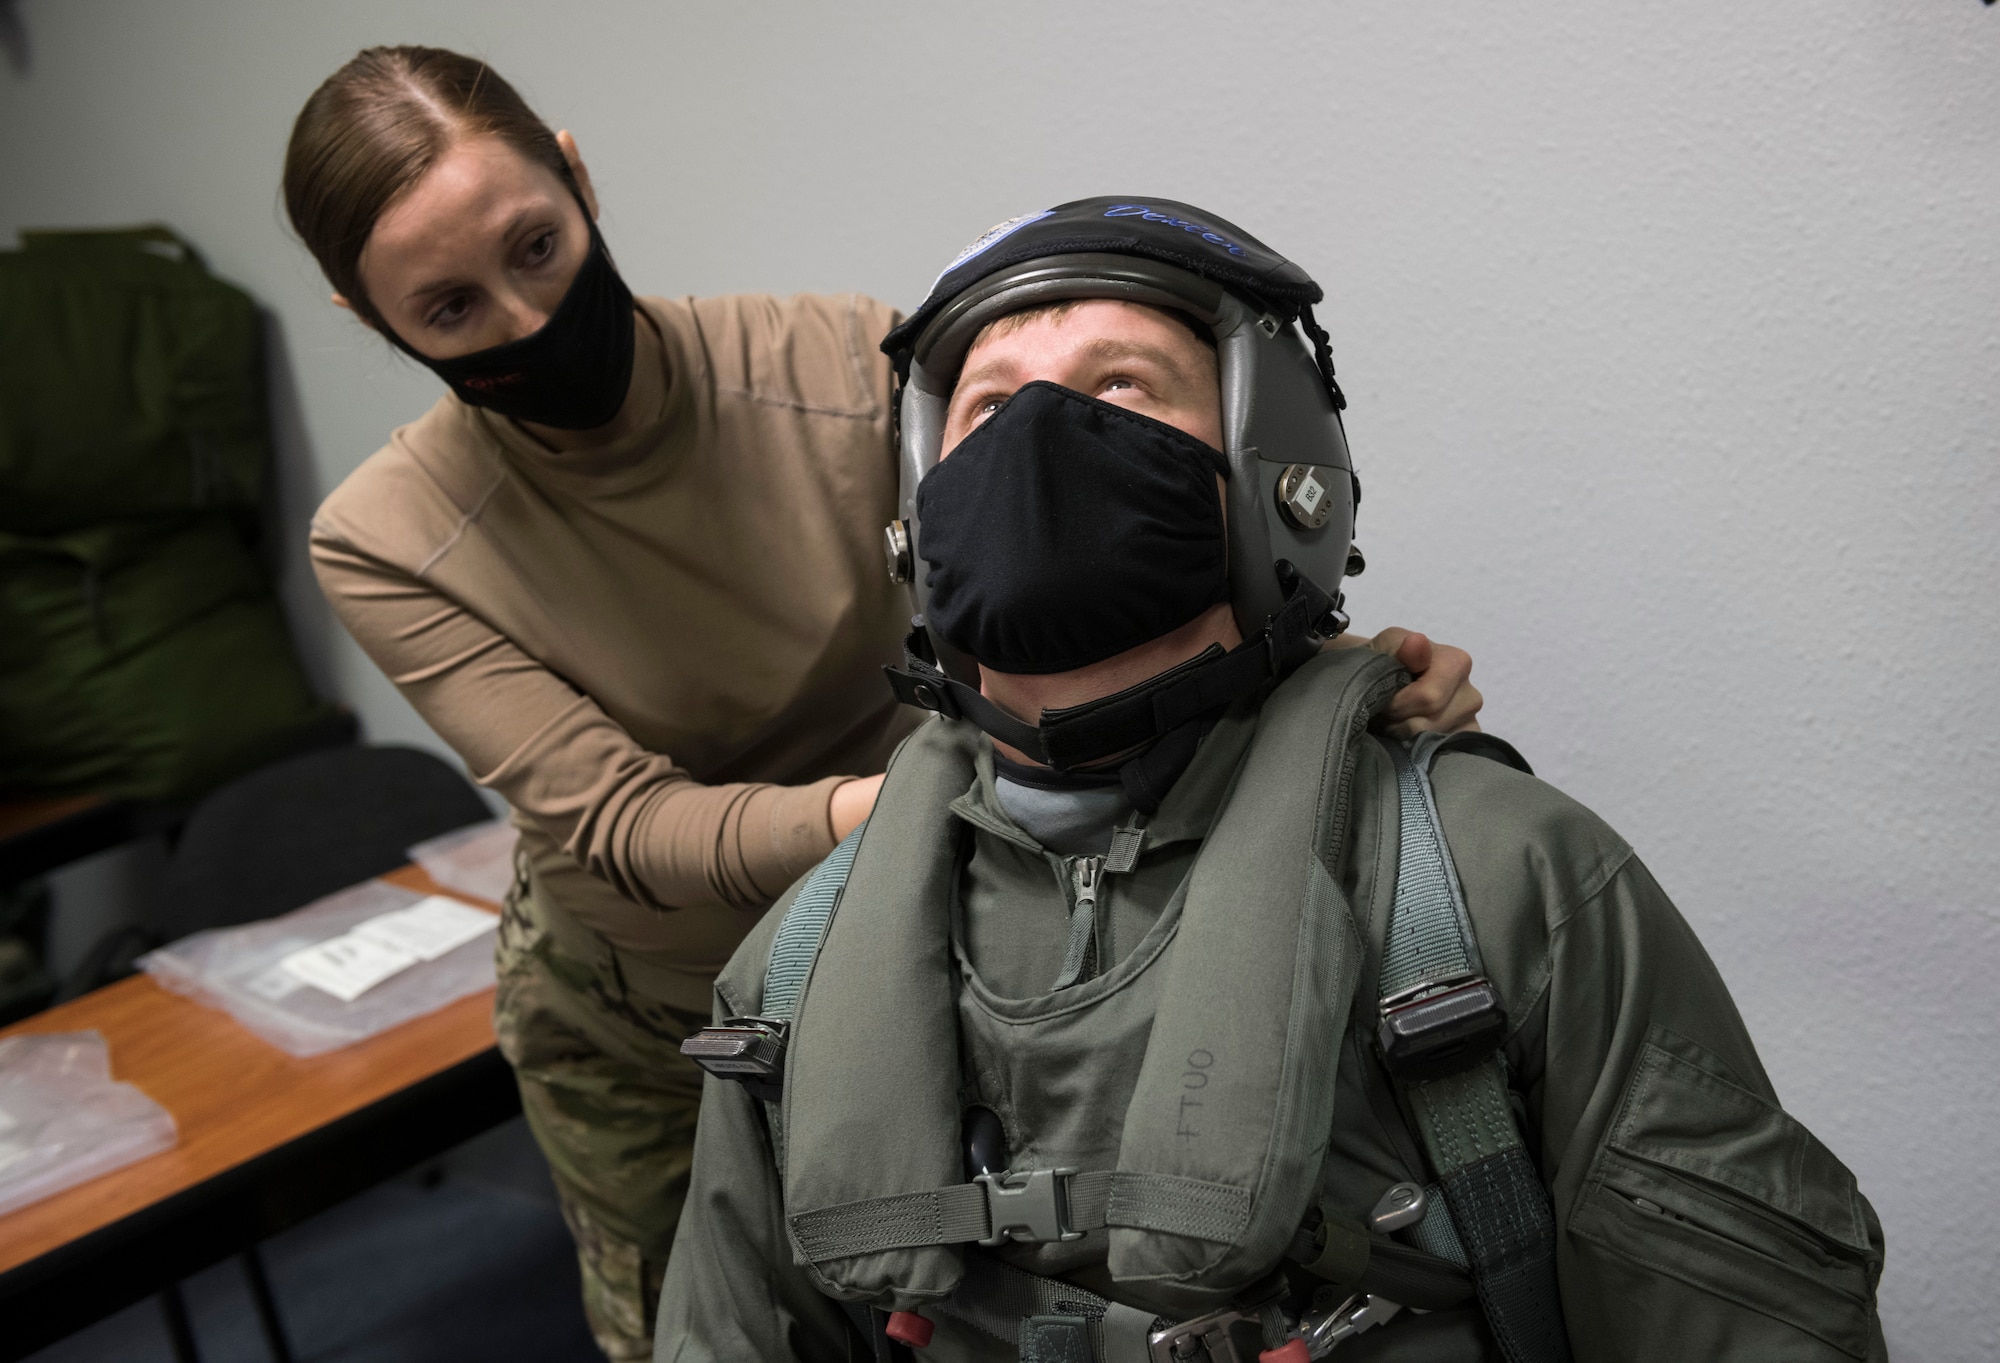 Airman 1st Class Lauren Wickman, left, an air flight equipment technician with the 3rd Operations Support Squadron checks F-22 Raptor pilot Capt. Jon “Dexter” Keranen’s range of motion while outfitting him in a newly received state-of-the-art integrated aircrew ensemble (IAE) flight suit and gear at Joint Base Elmendorf-Richardson, Alaska, Nov. 9, 2020. The brand-new, custom-fit gear mitigates adverse physiological effects on F-22 Raptor pilots by reducing the thermal burden while increasing mobility and comfort. (U.S. Air Force photo by Alejandro Peña)